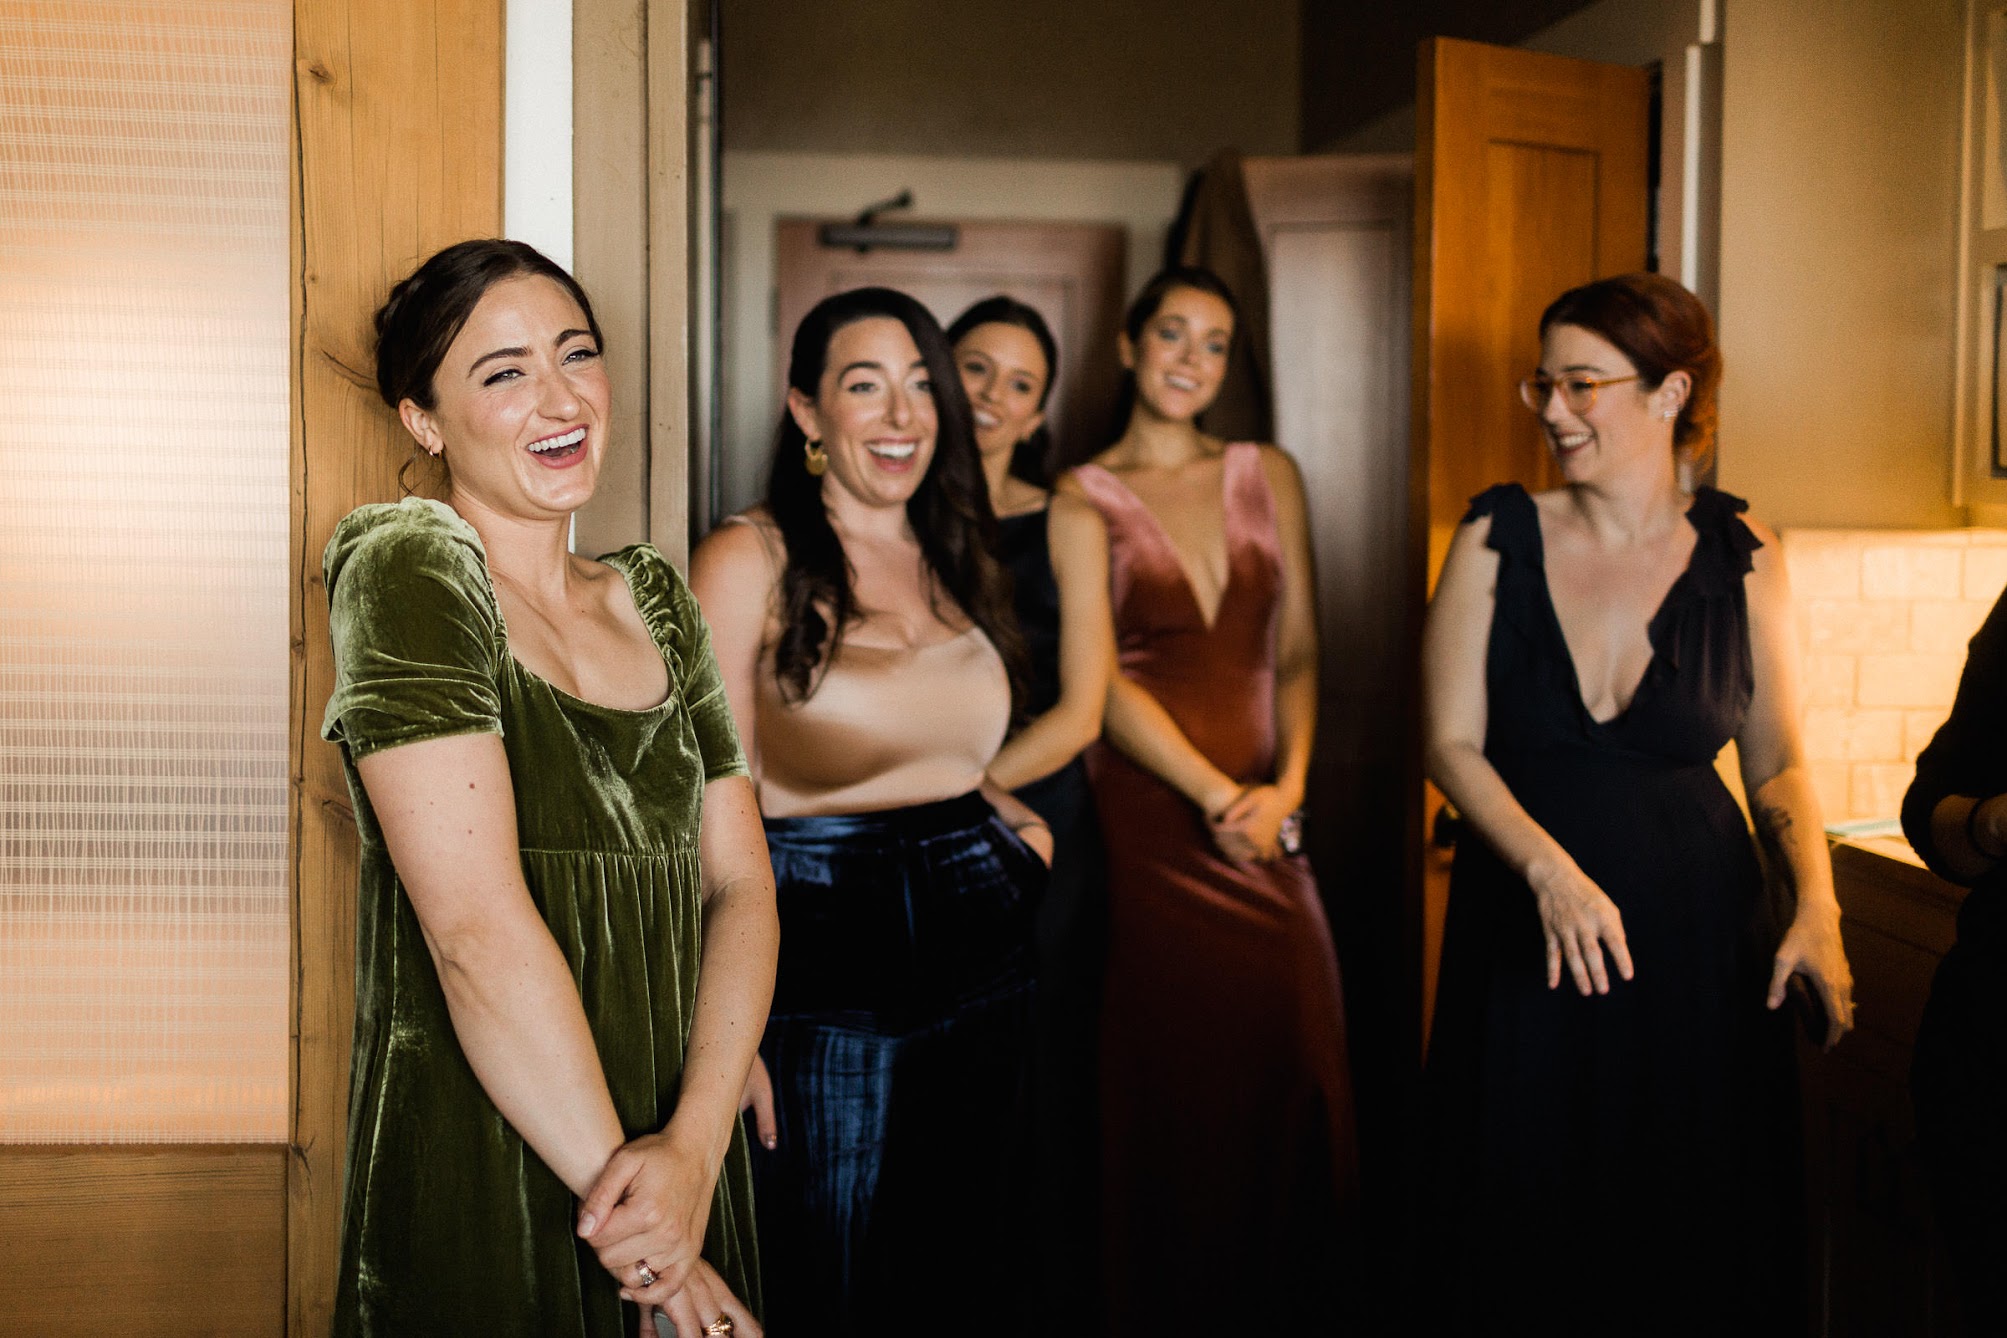 The bridesmaids all in velvet dresses looking at the bride and smiling 